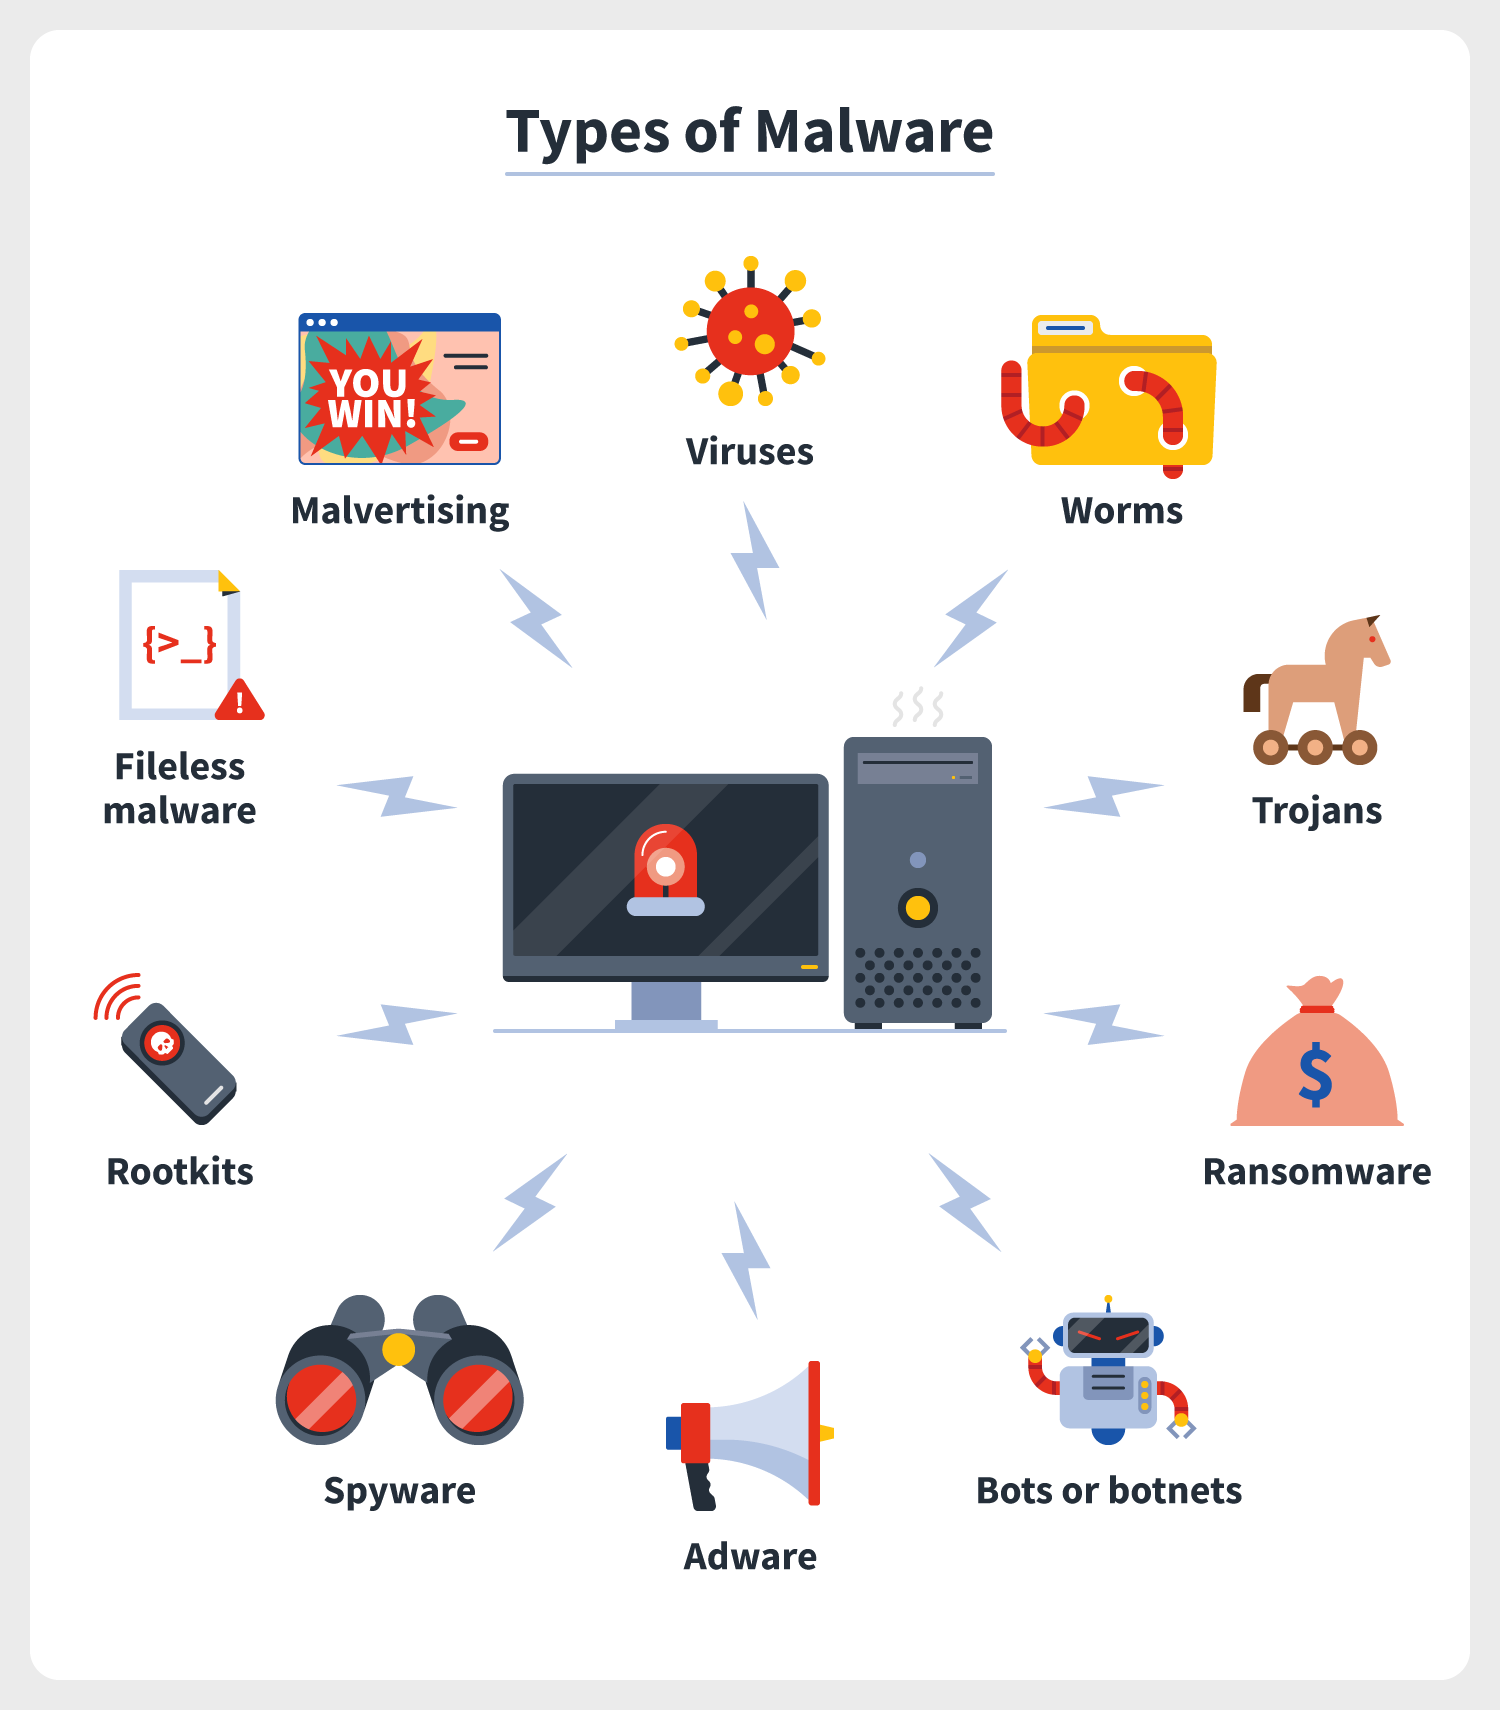 How are can you prevent trojans or spyware